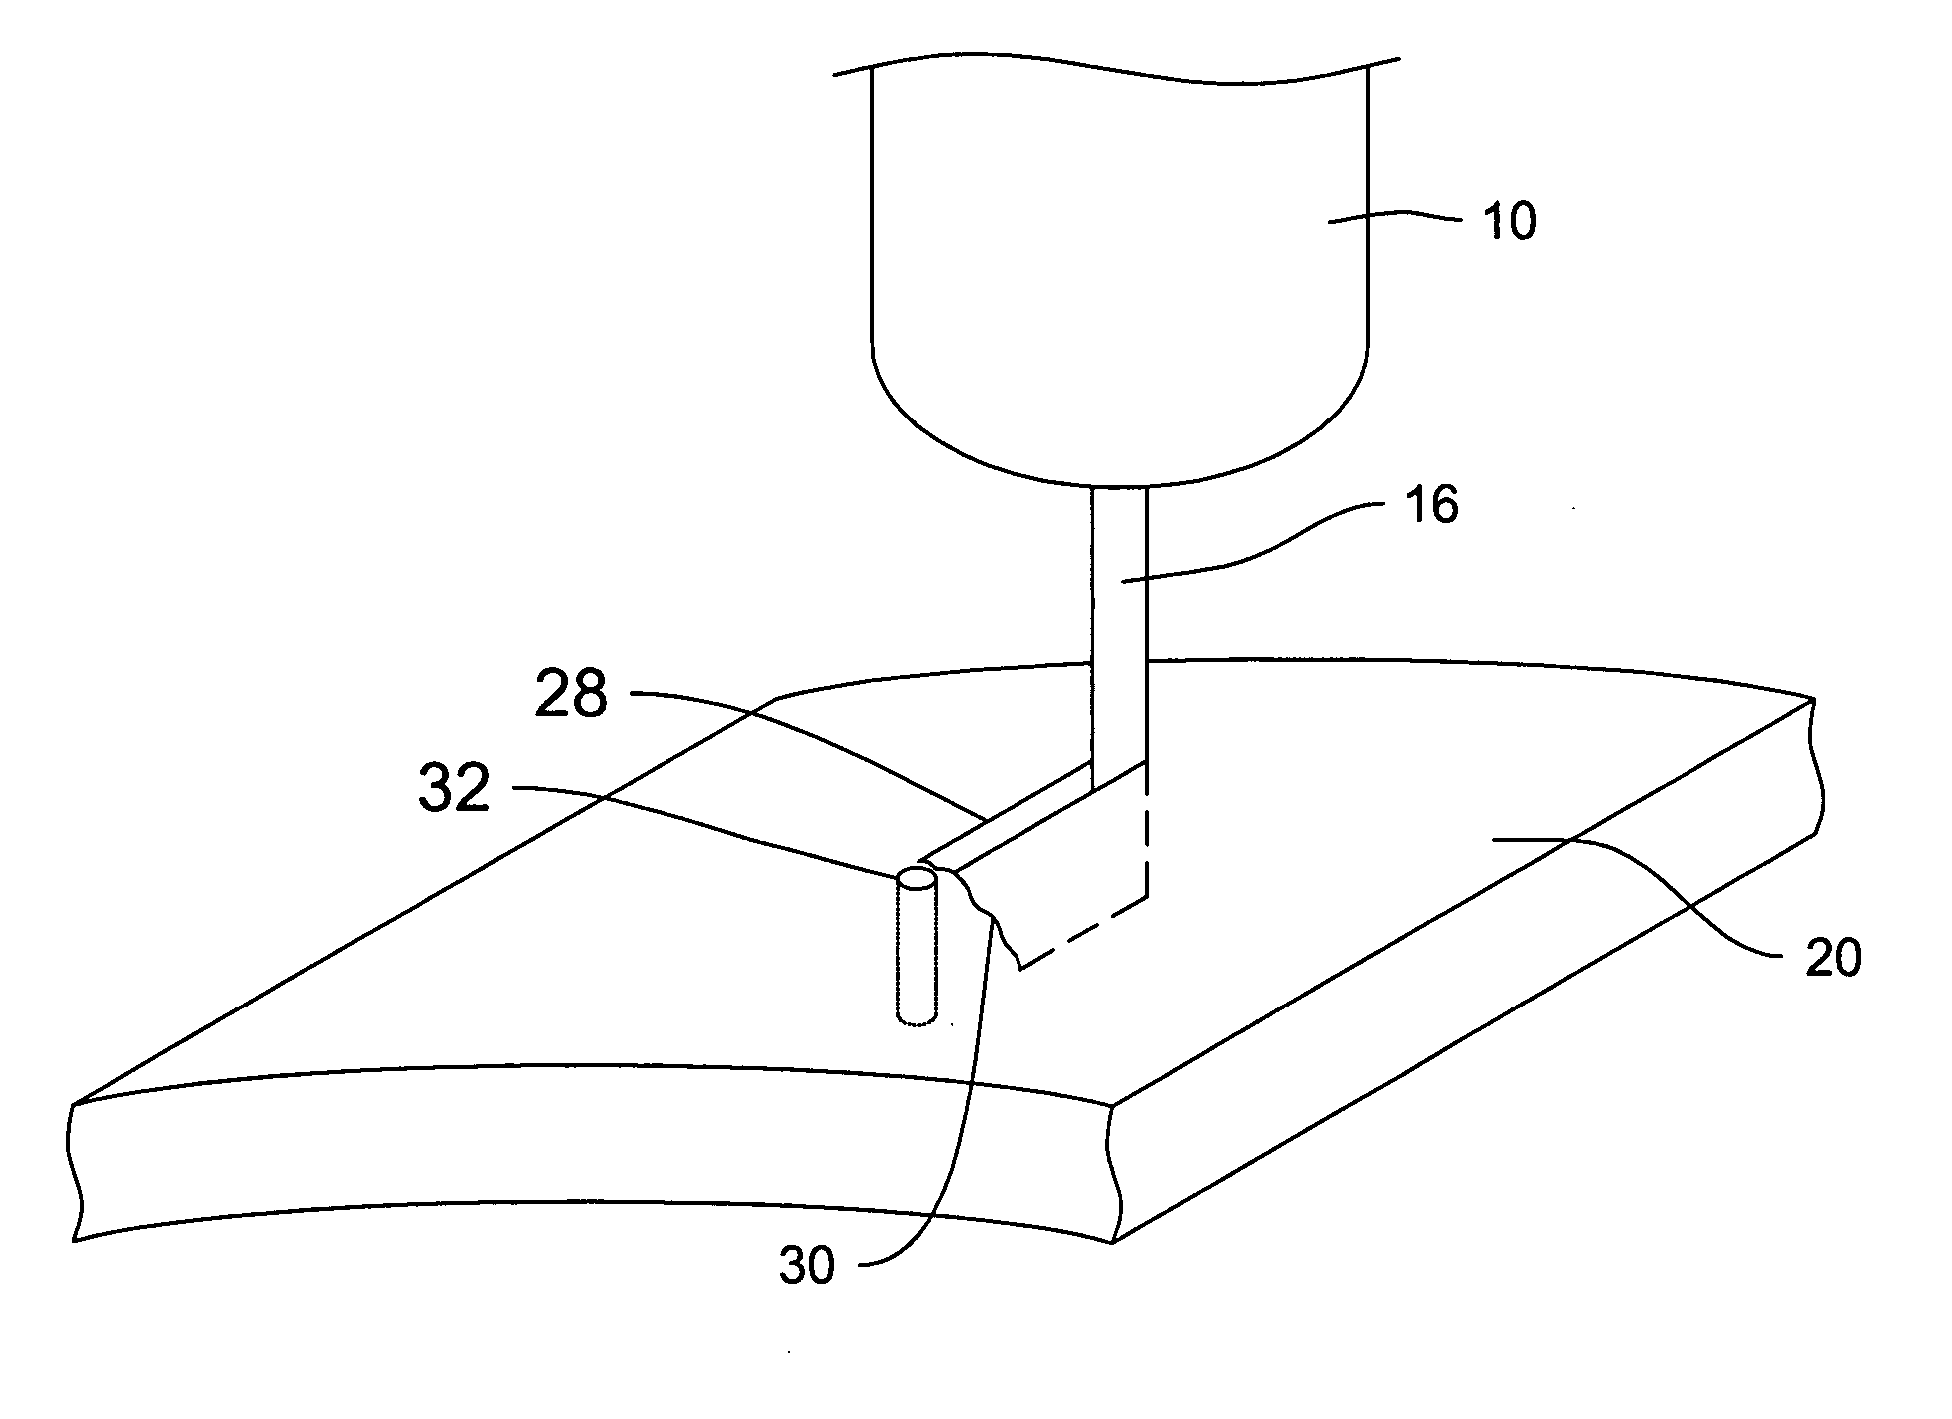 Method of cutting material with hybrid liquid-jet/laser system